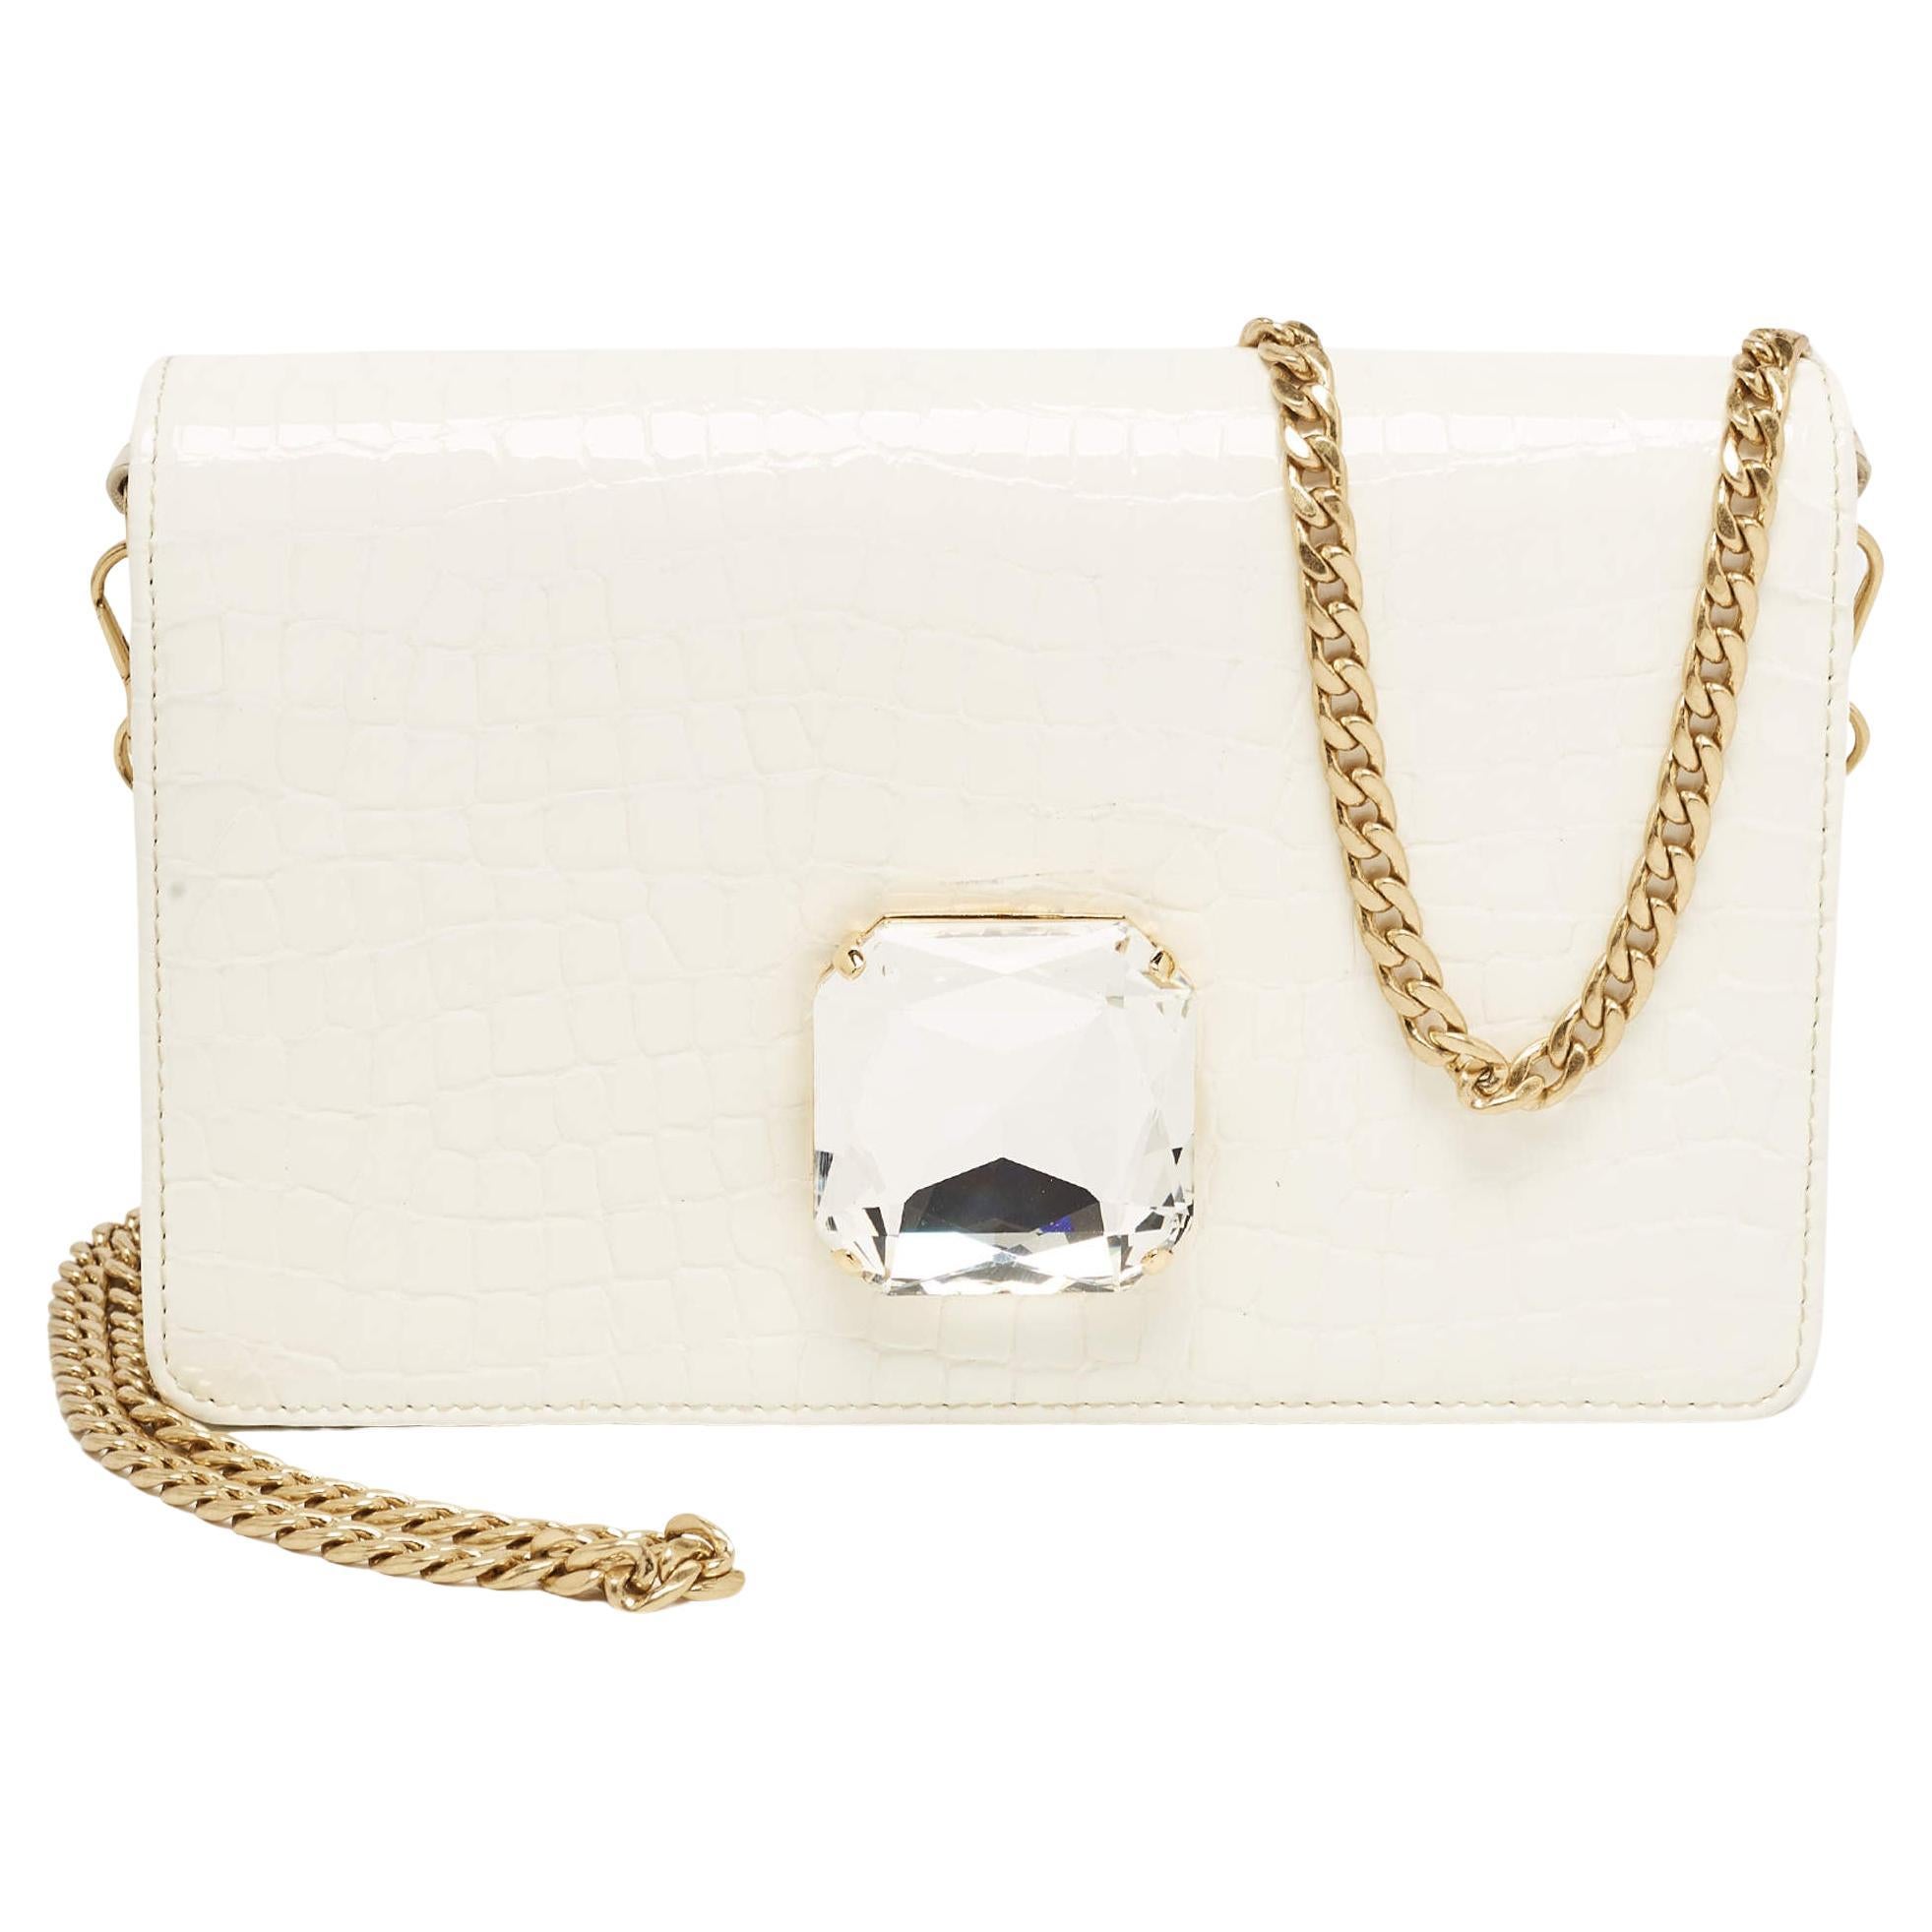 Miu Miu Off White Croc Embossed Leather Crystal Embellished Chain Clutch For Sale